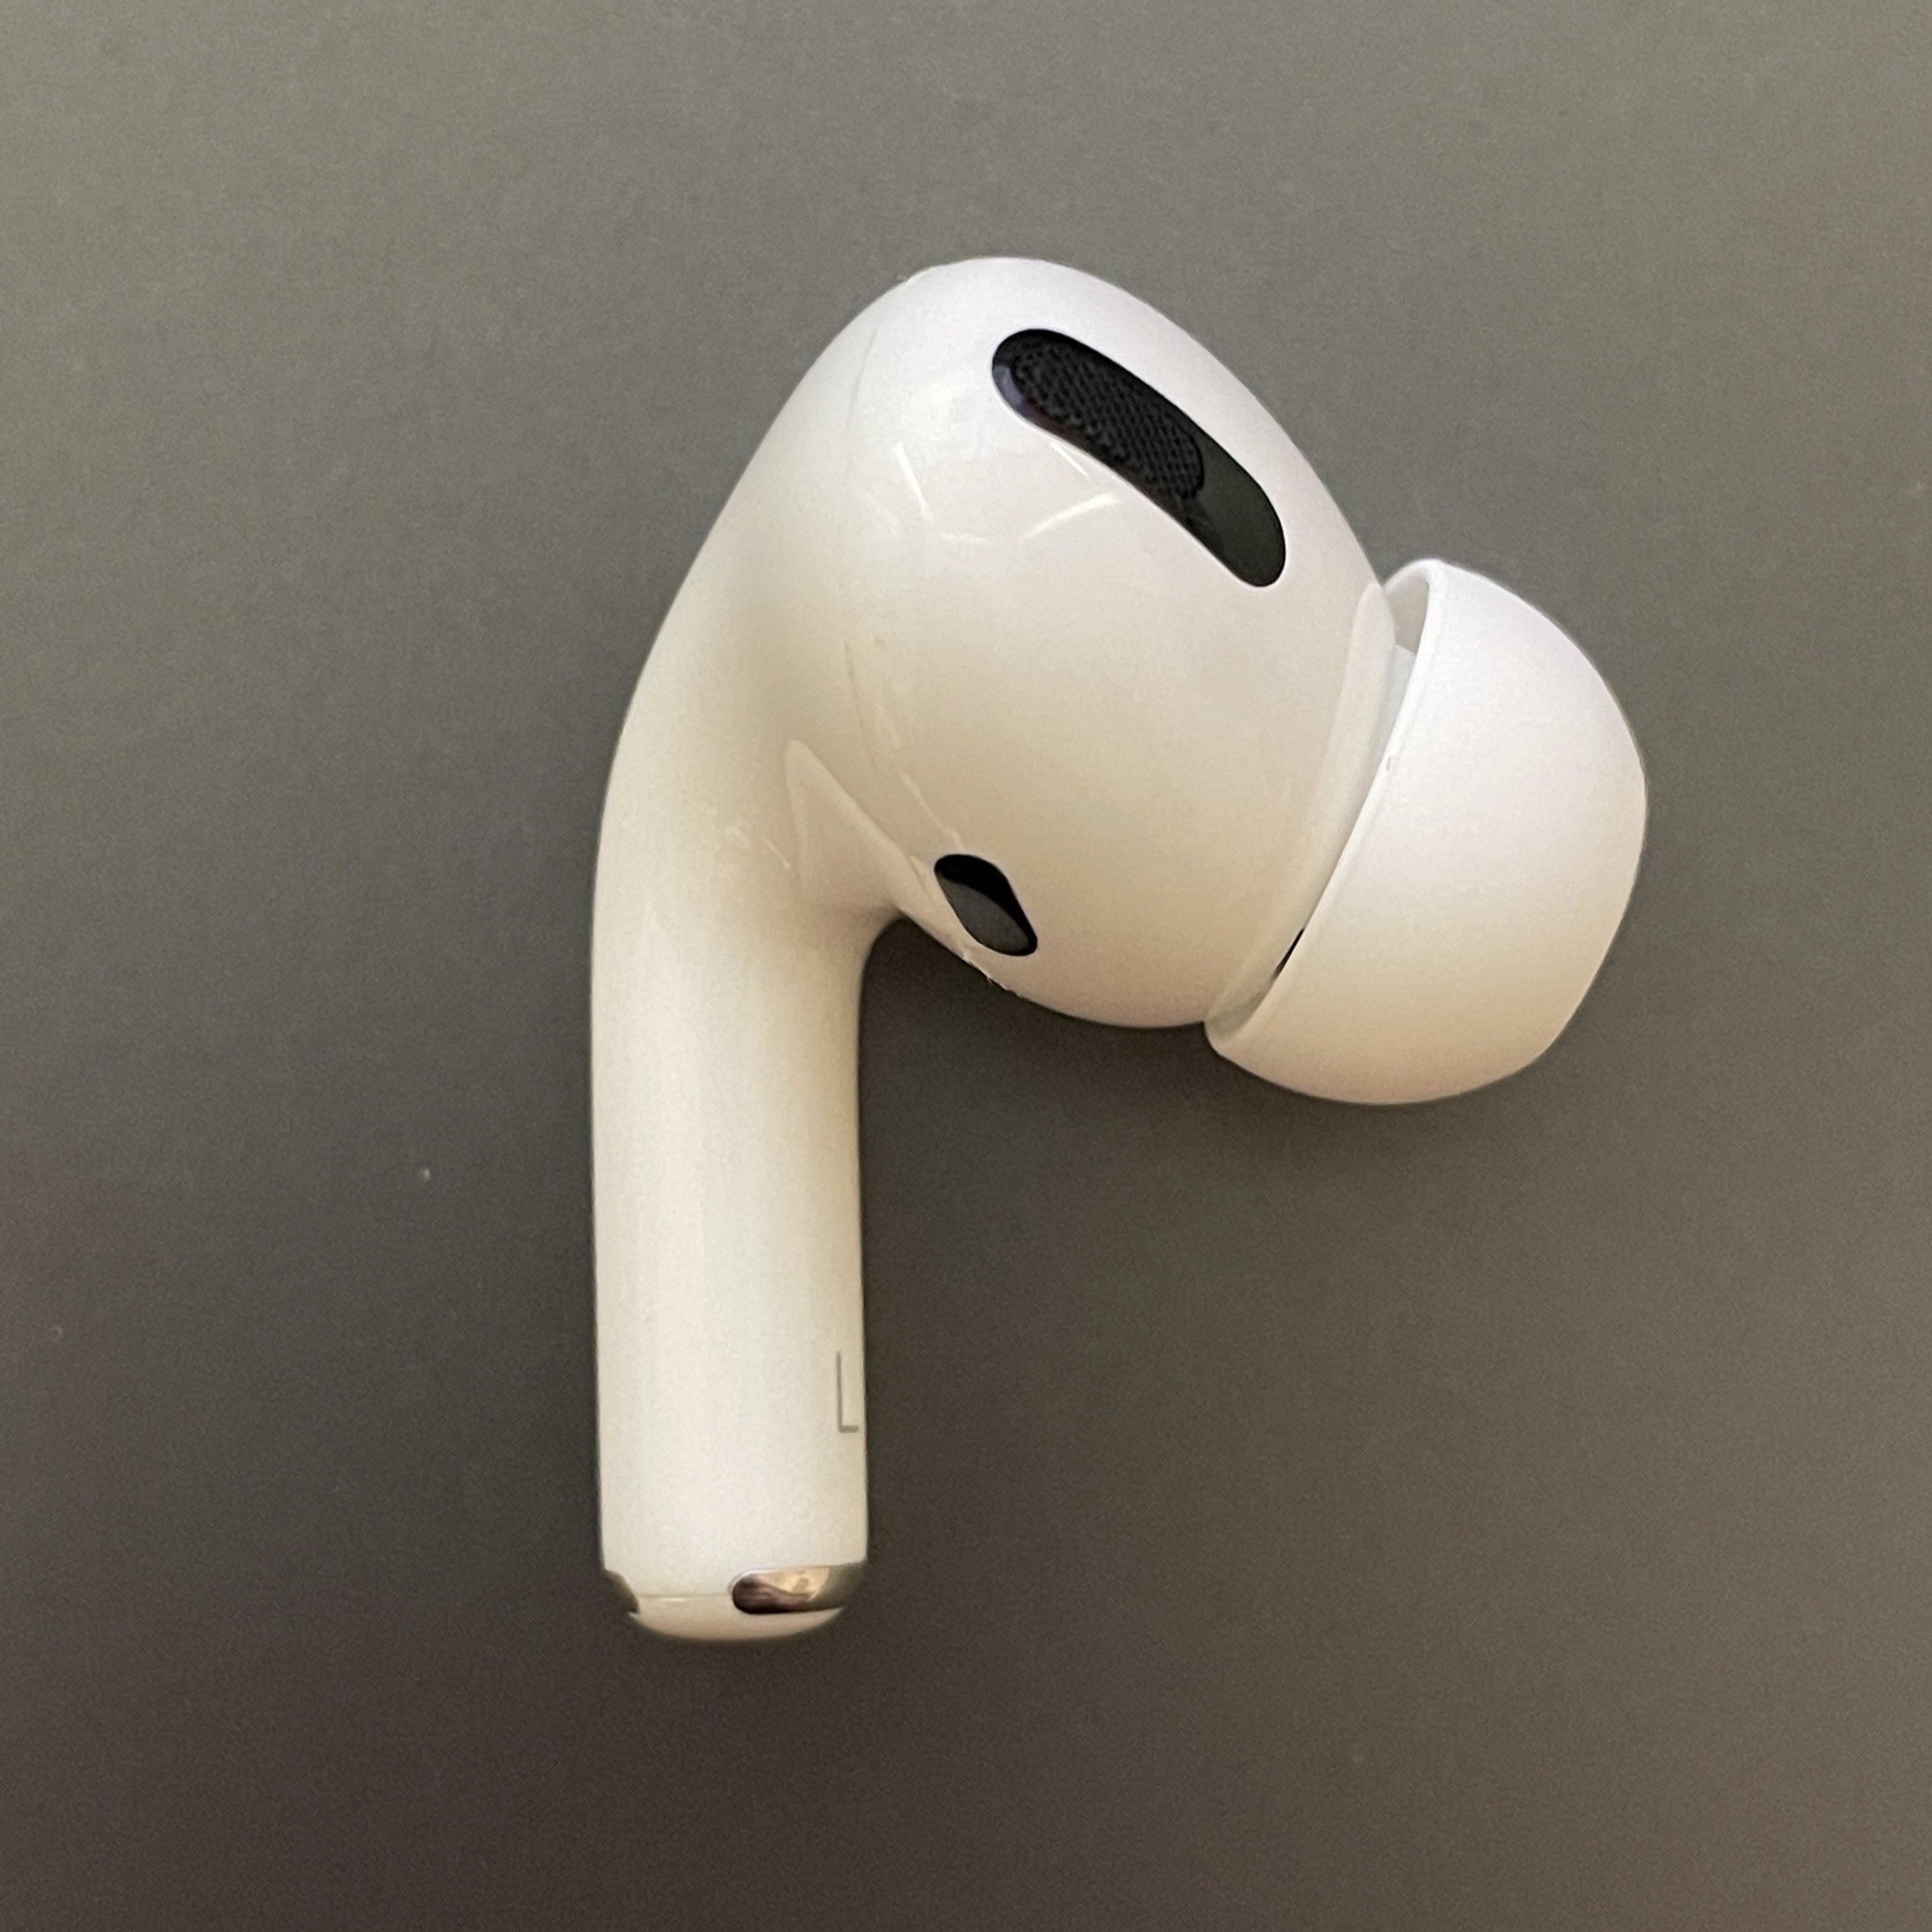 Apple Airpods Pro 1st Gen LEFT Side Airpod Only - Original Apple Airpods  Pro 1st